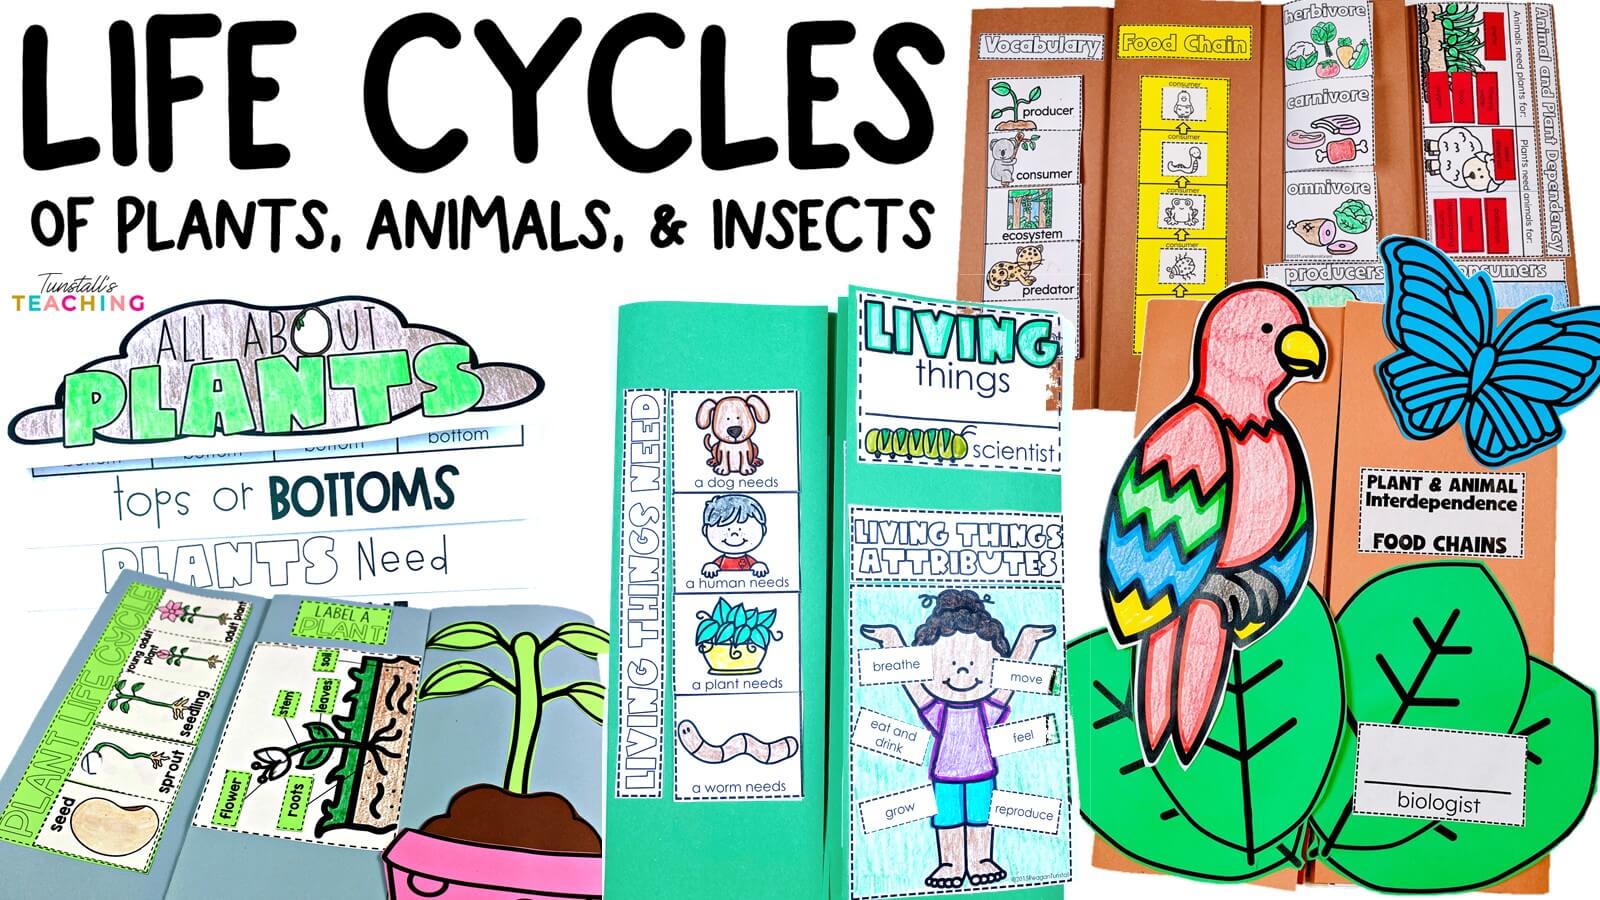 Life Cycles of Plants, Animals, and Insects